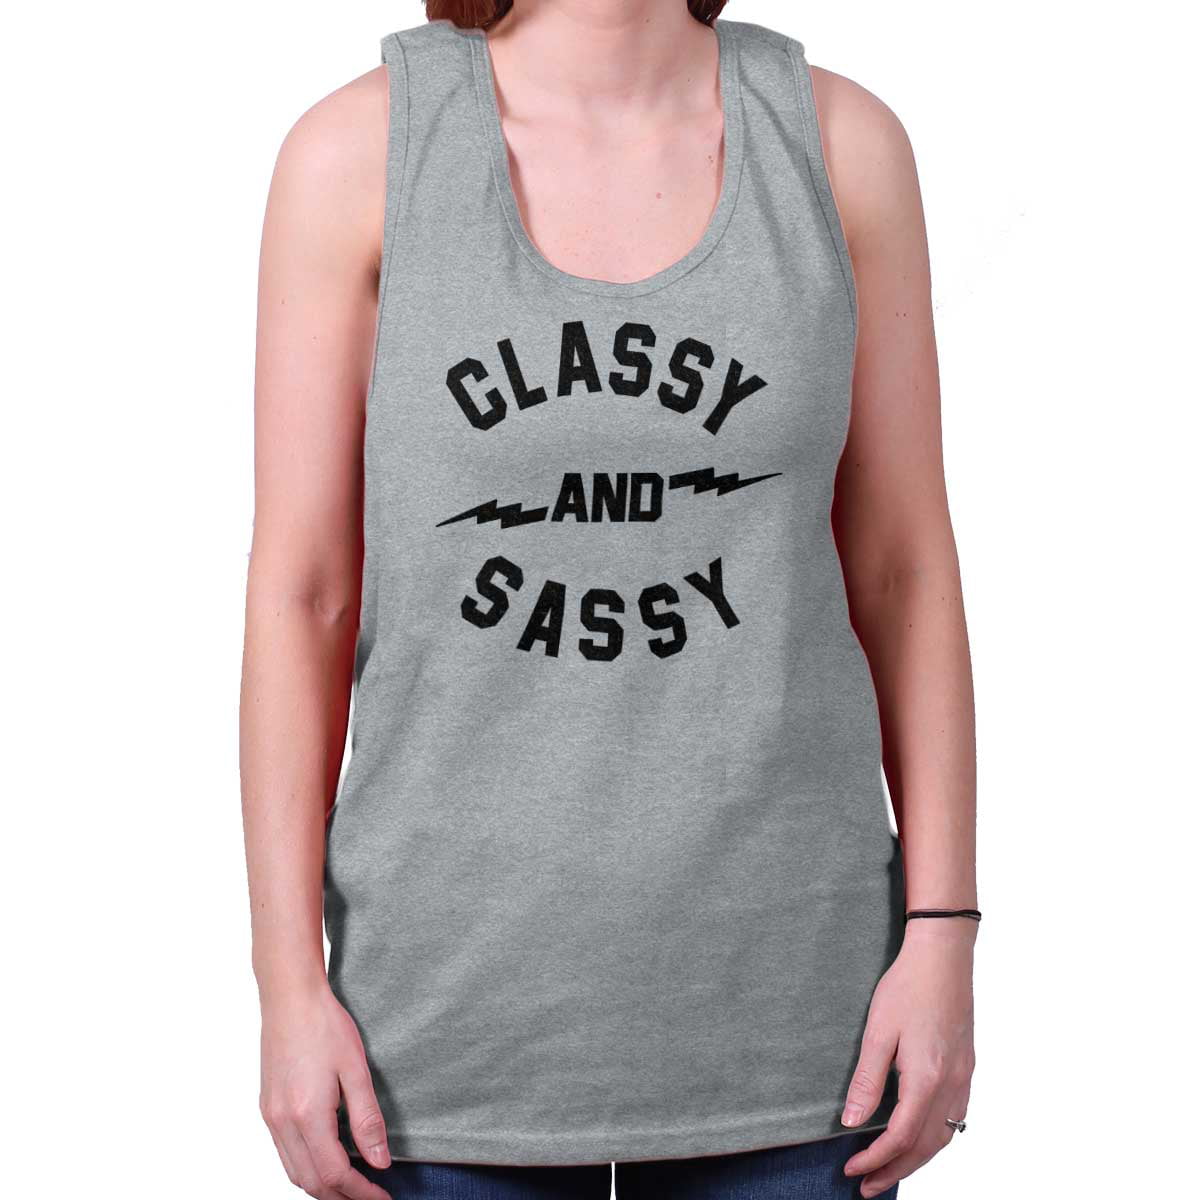 Musician Youre Looking At An Awesome Funny Novelty Vest Singlet Top